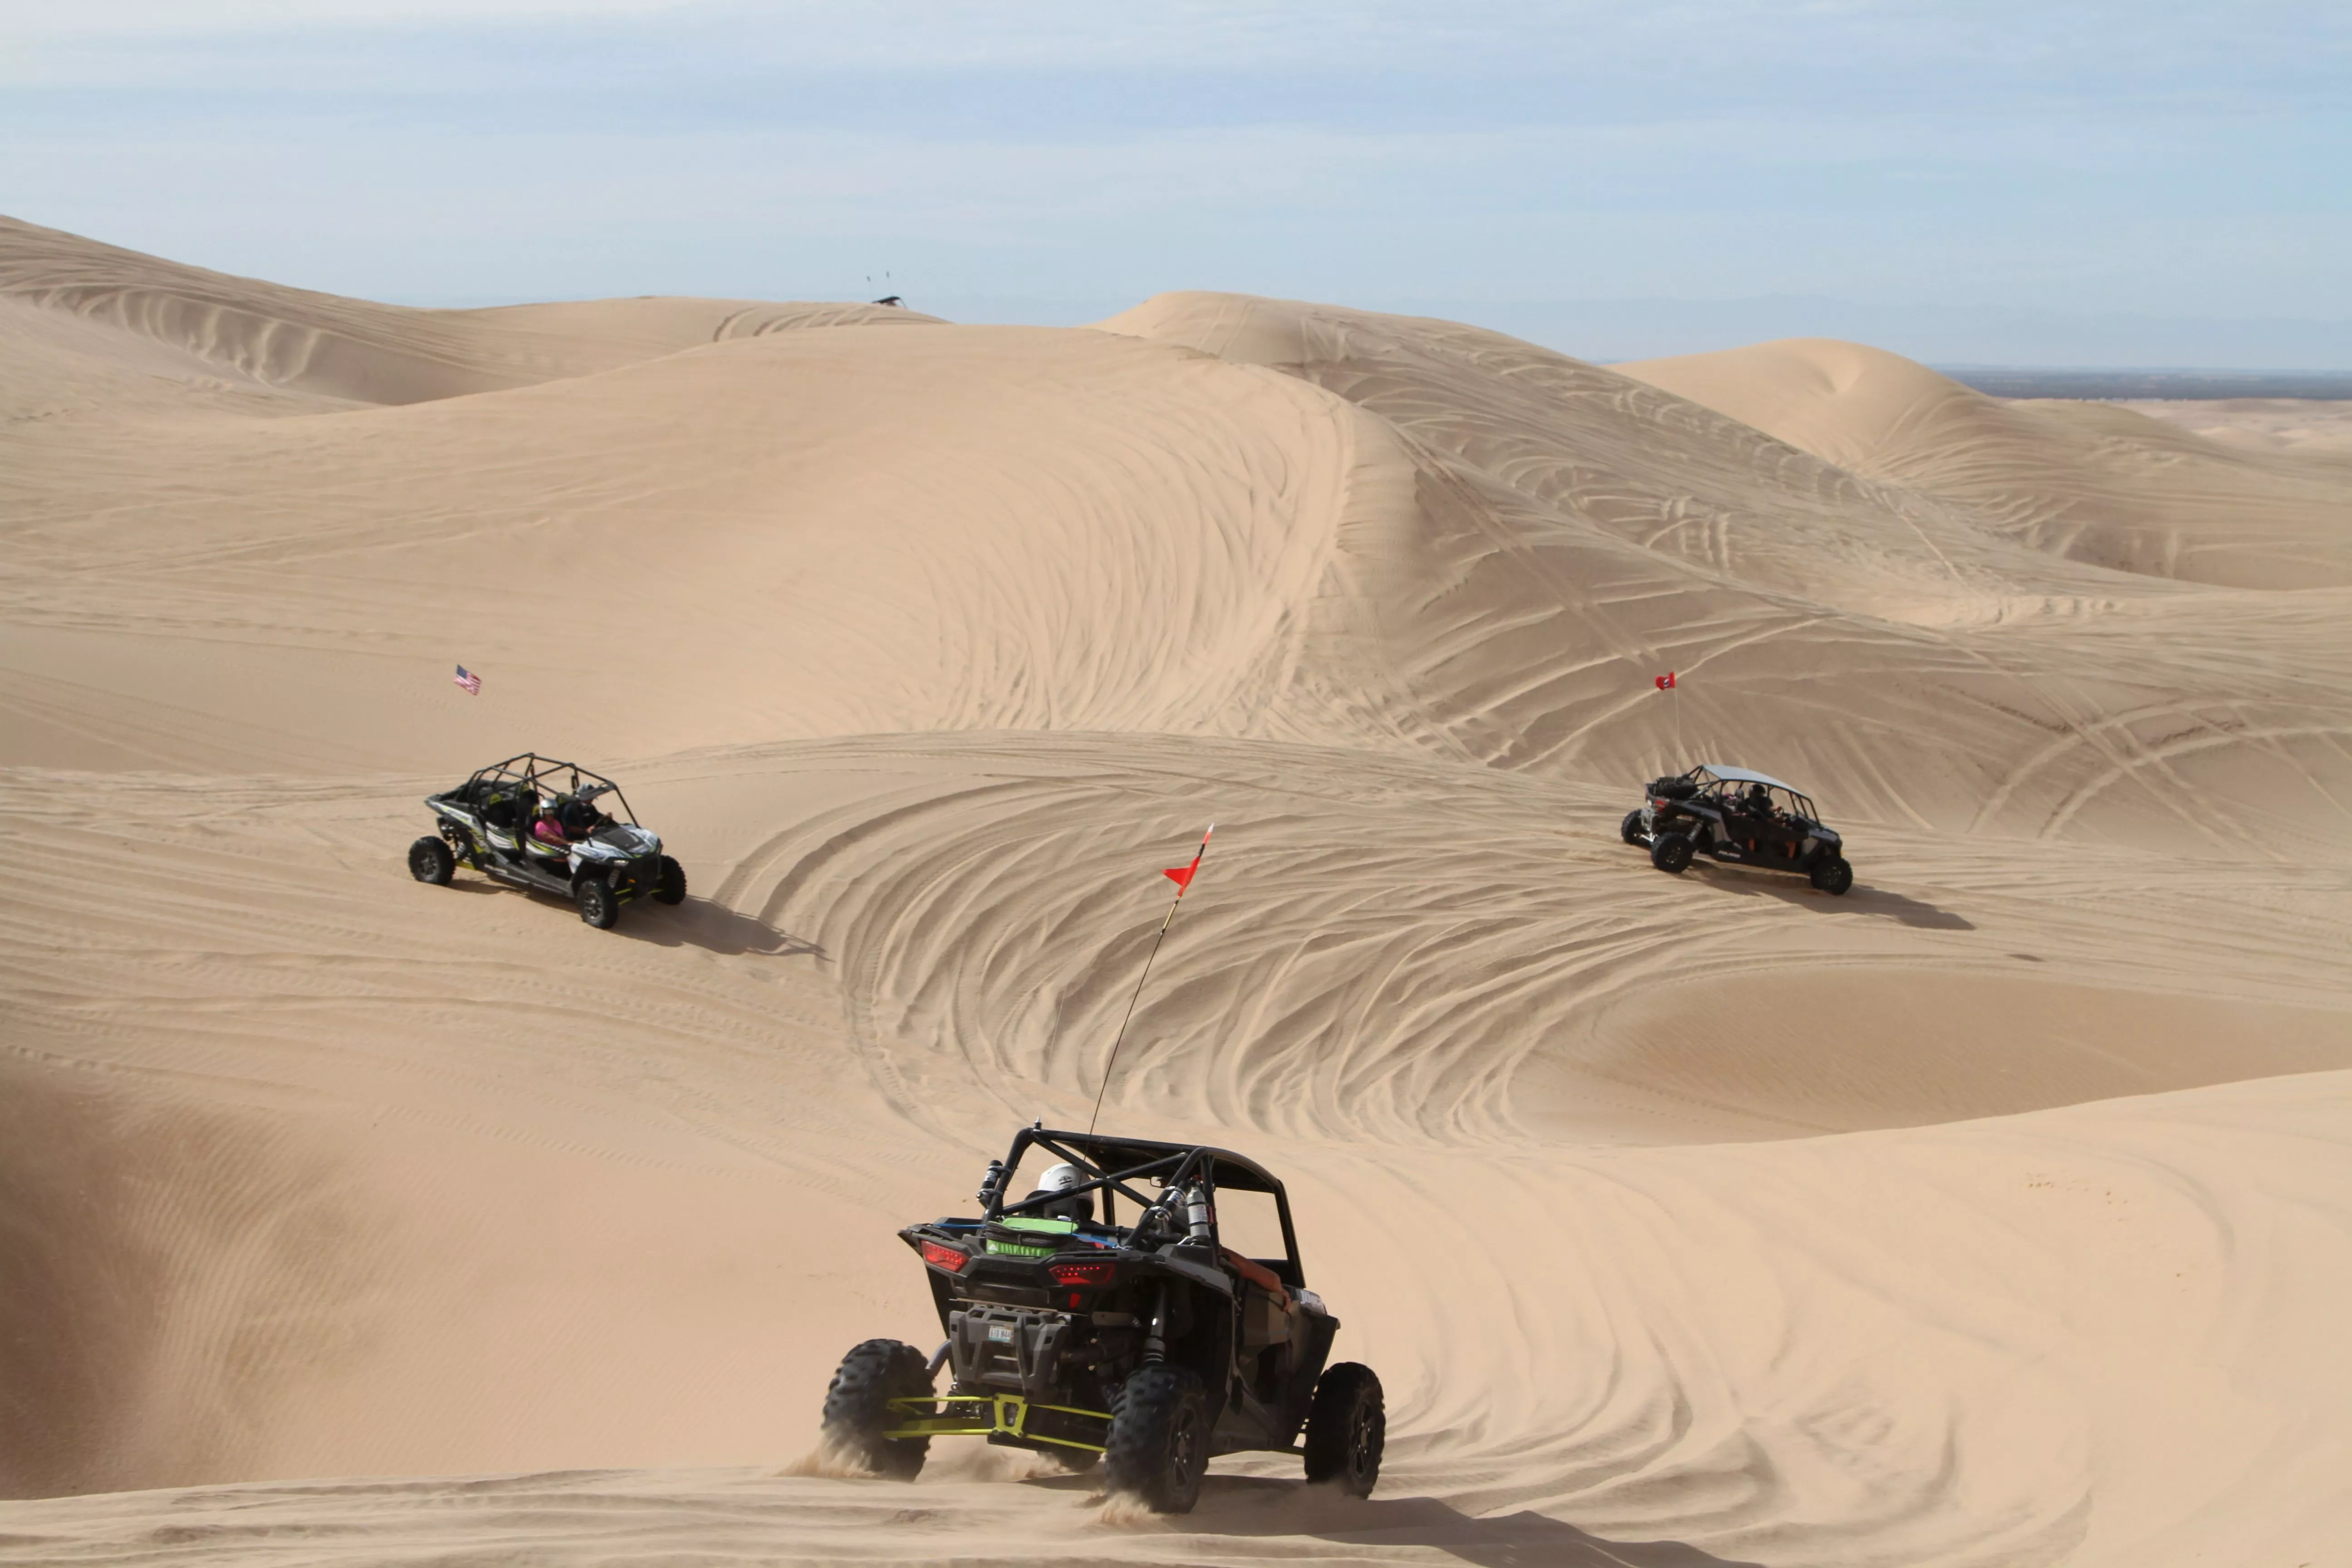 Imperial Sand Dunes in USA, North America | Deserts,Motorcycles,ATVs - Rated 1